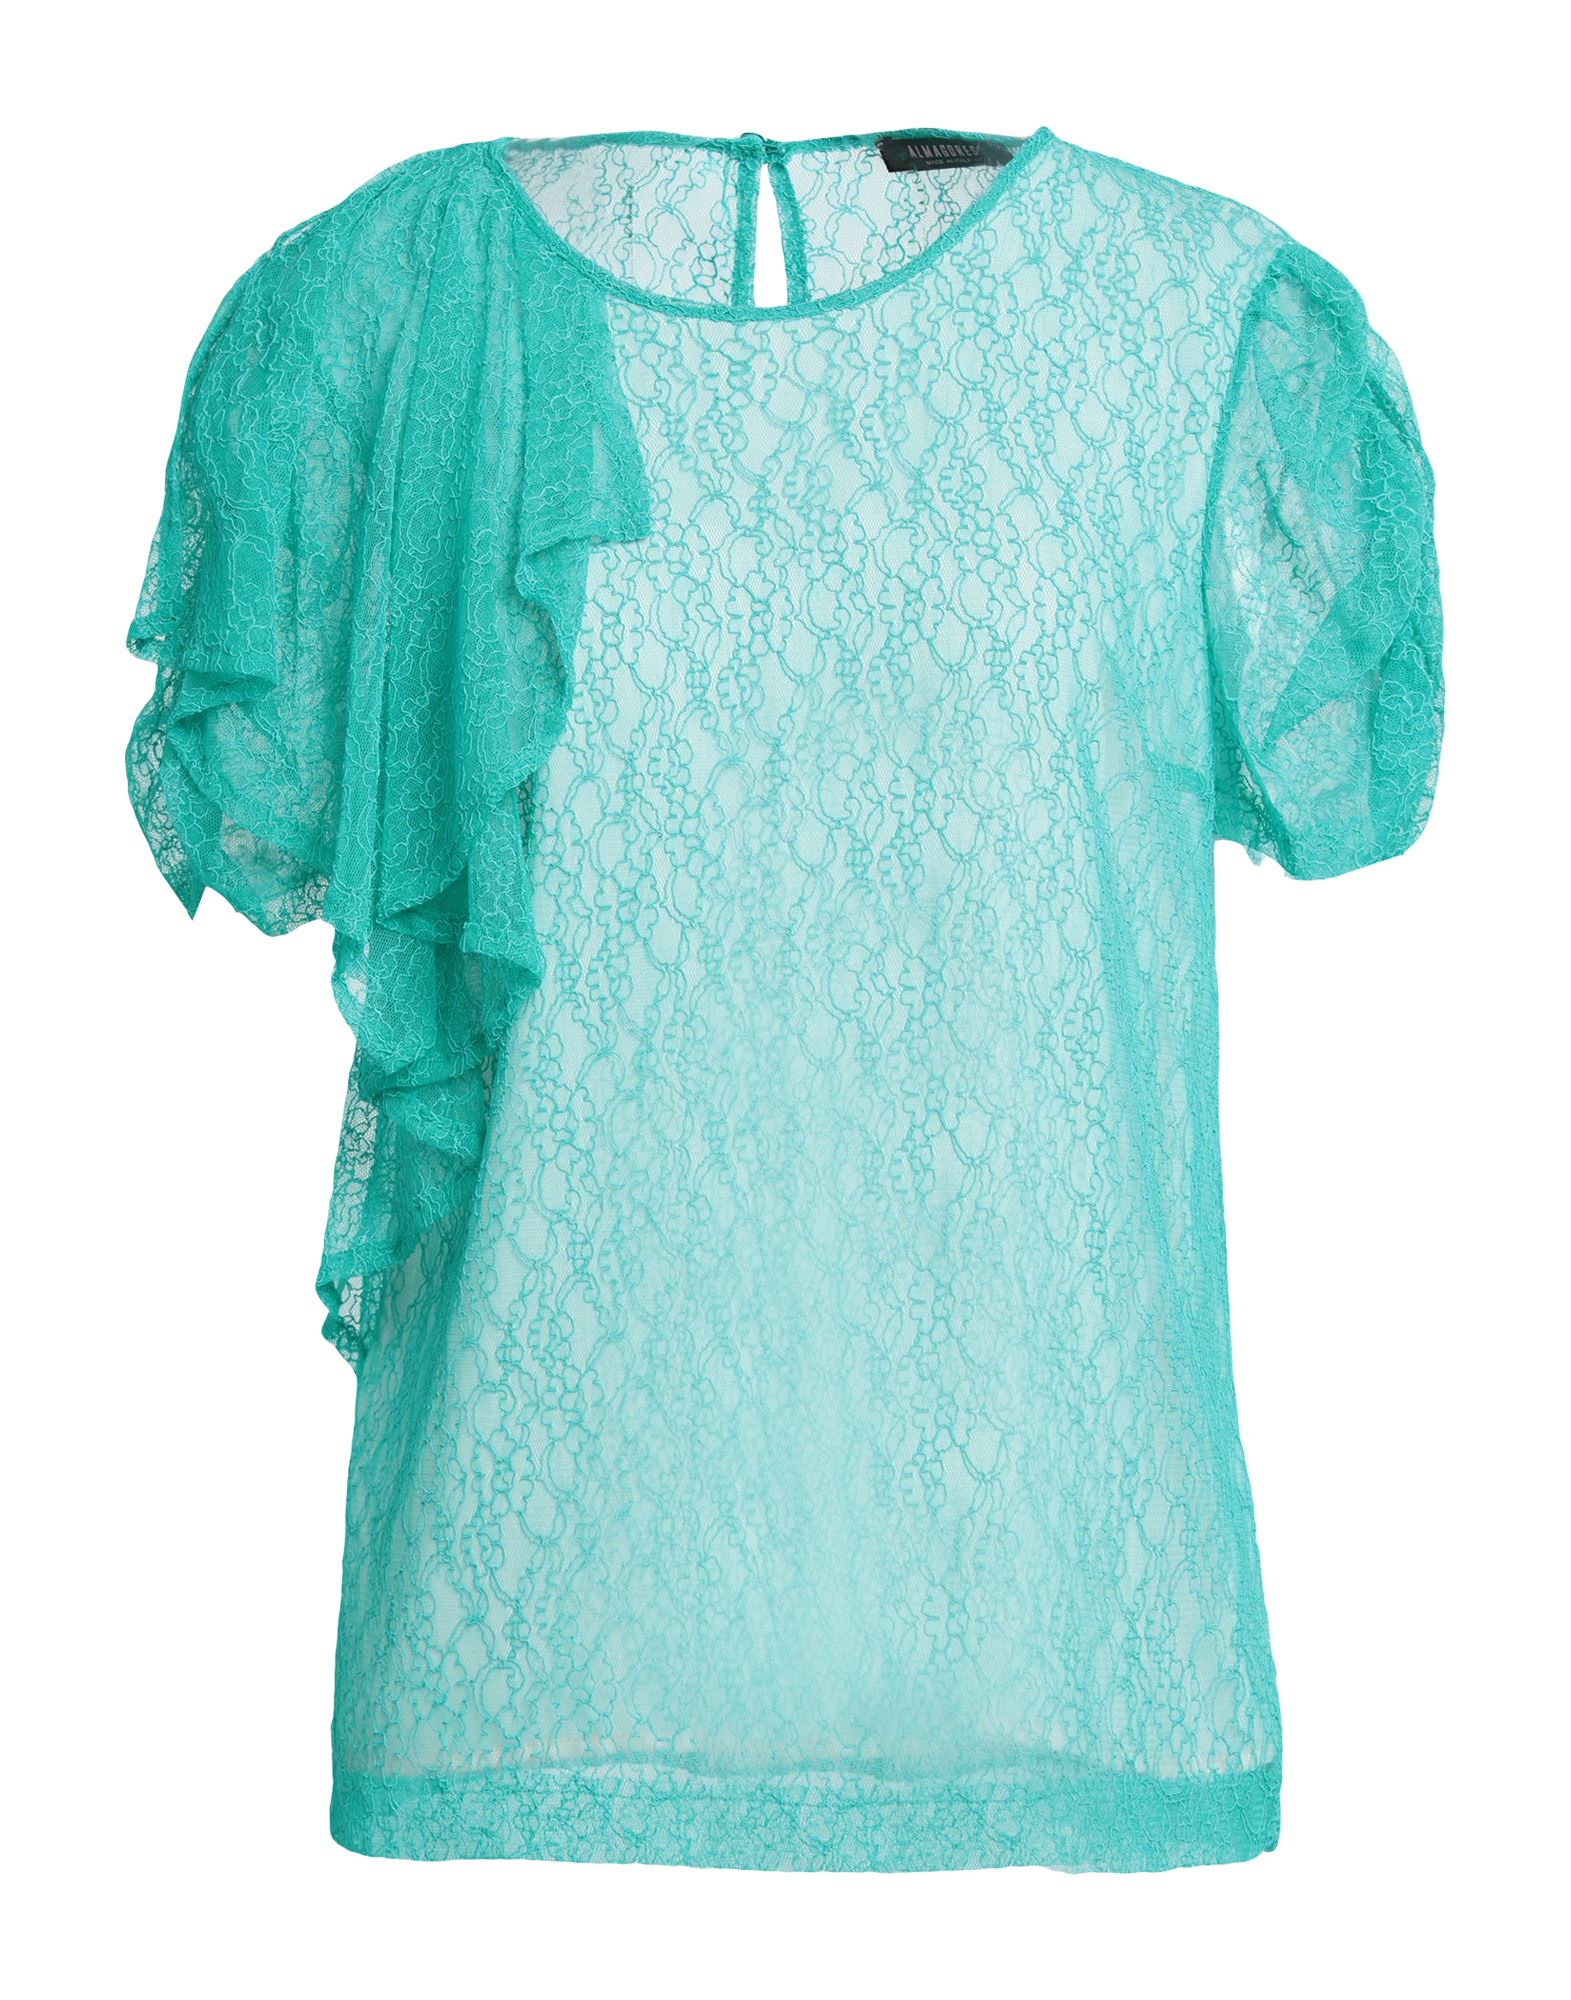 Almagores Blouses In Turquoise